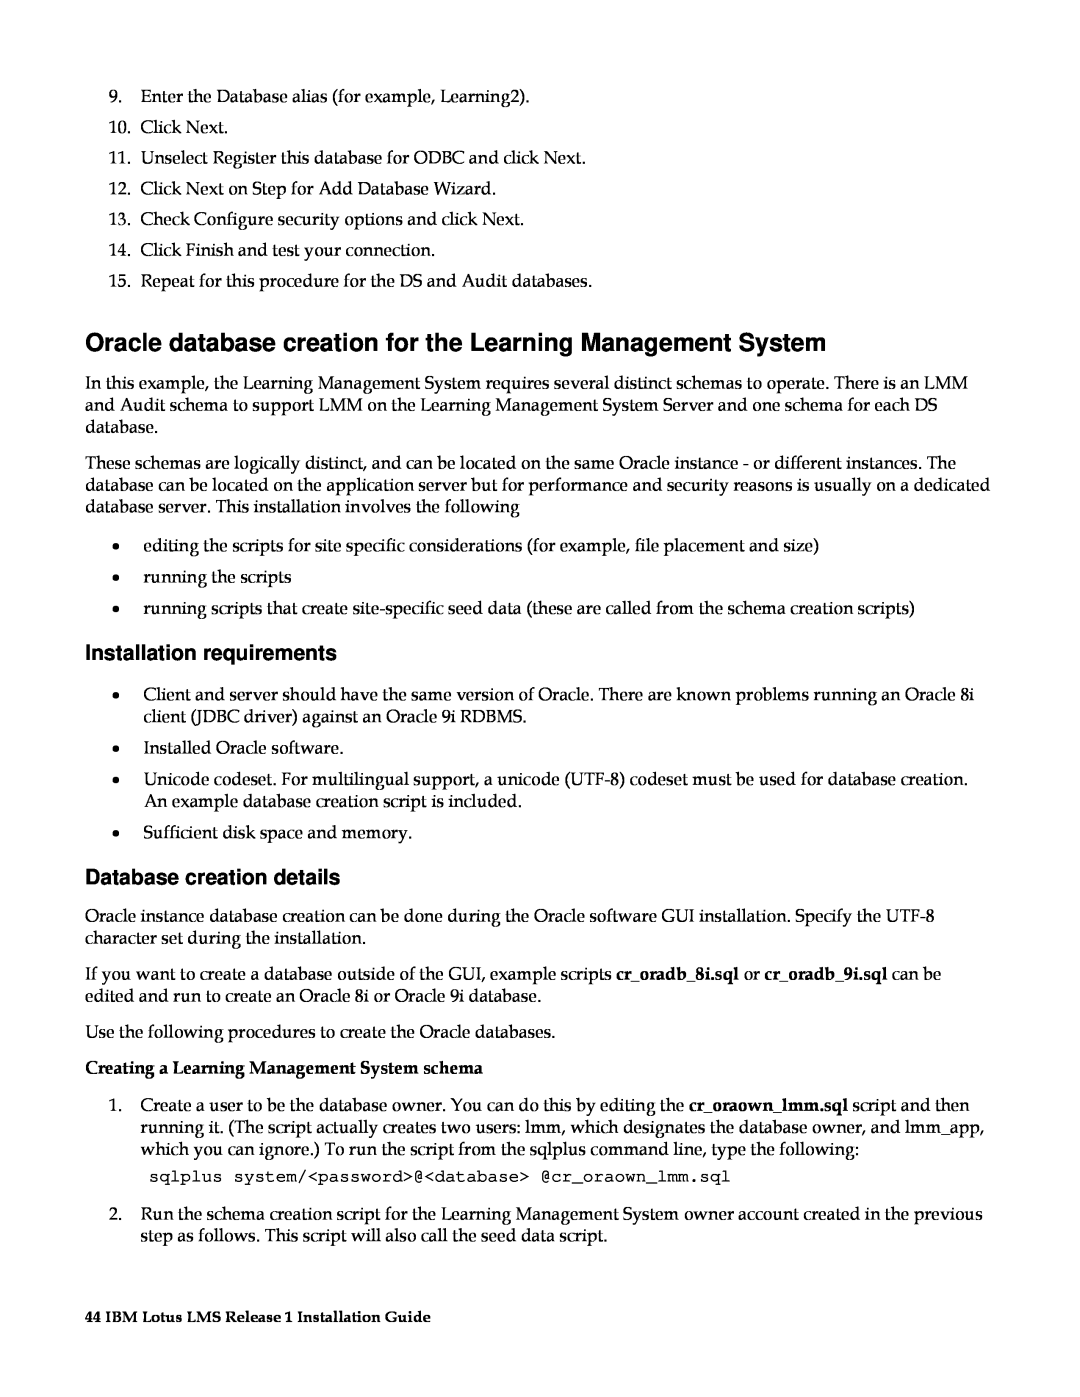 IBM G210-1784-00 manual Oracle database creation for the Learning Management System, Installation requirements 